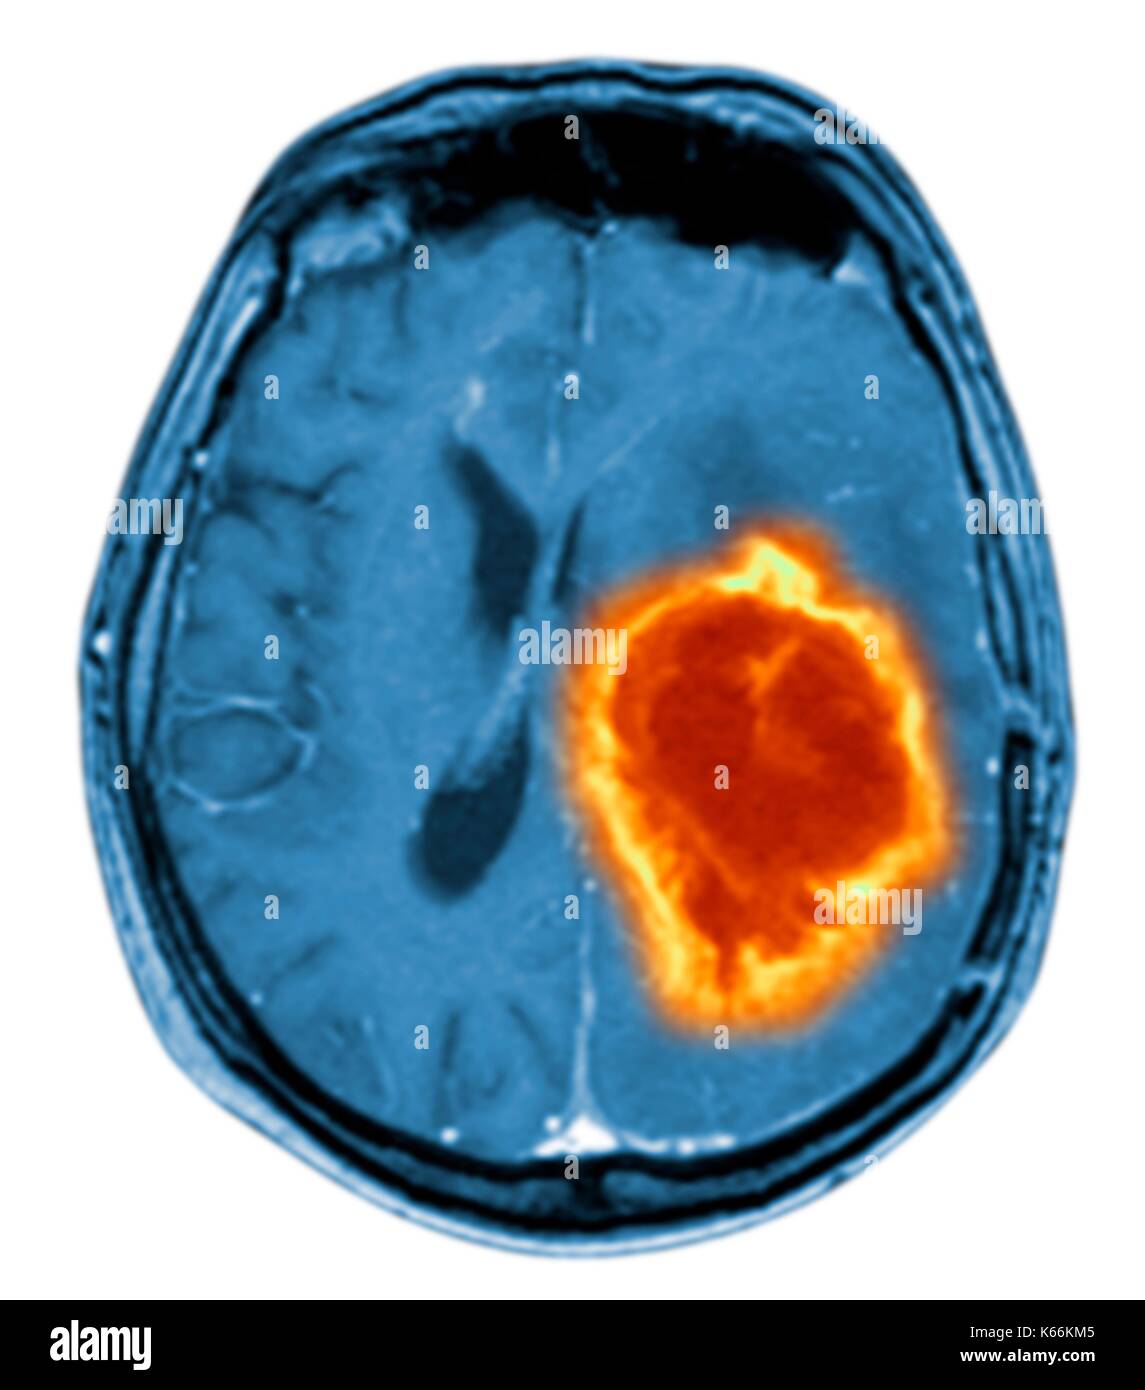 Brain tumour. Coloured Magnetic Resonance Imaging (MRI) scan of an axial section through the brain showing a metastatic tumour. At bottom left is the tumour (red-yellow) This tumour occurs within one cerebral hemisphere; the other hemisphere is at right. The eyeballs - not visible -are at top. Metastatic cancer is a secondary disease spread from cancer elsewhere in the body. Metastatic brain tumours are malignant. Typically they cause brain compression and nerve damage Stock Photo